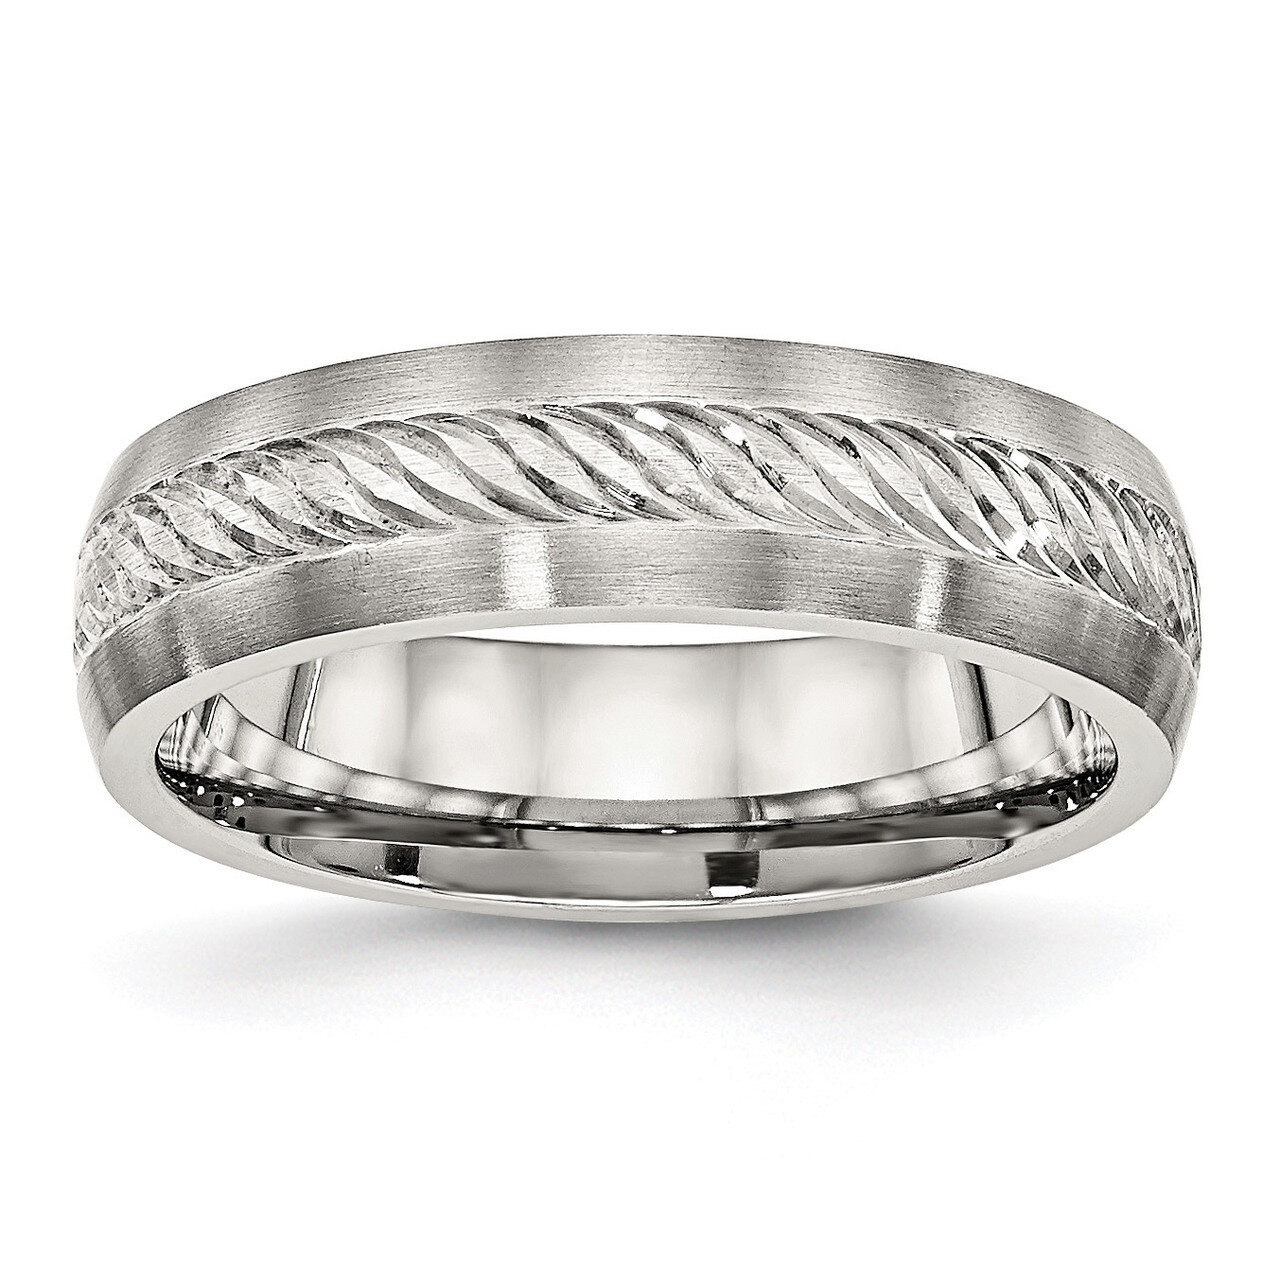 Silver Diamond-cut Inlay Ring Stainless Steel Brushed SR463